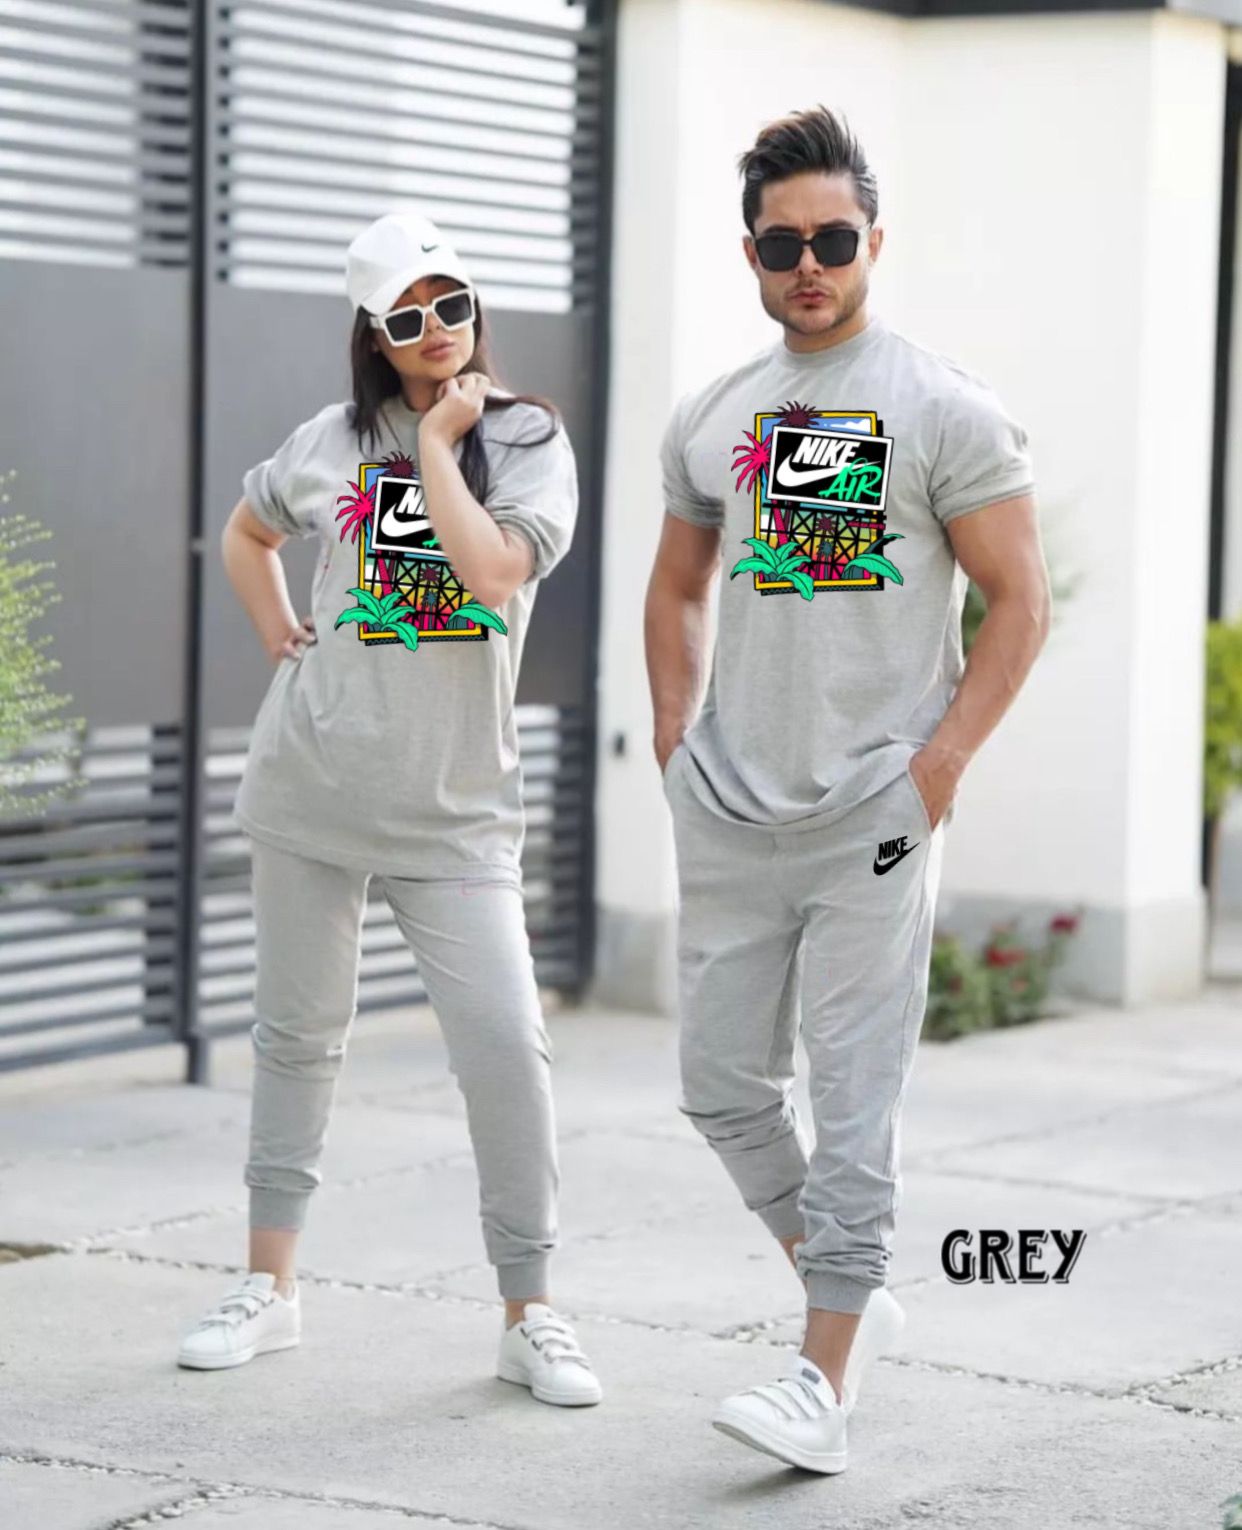 Details View - NIKE Half Sleeves Tracksuit photos - reseller,reseller marketplace,advetising your products,reseller bazzar,resellerbazzar.in,india's classified site,Nike Tracksuit | mens nike tracksuit | nike tracksuit for men | nike tracksuit for women 